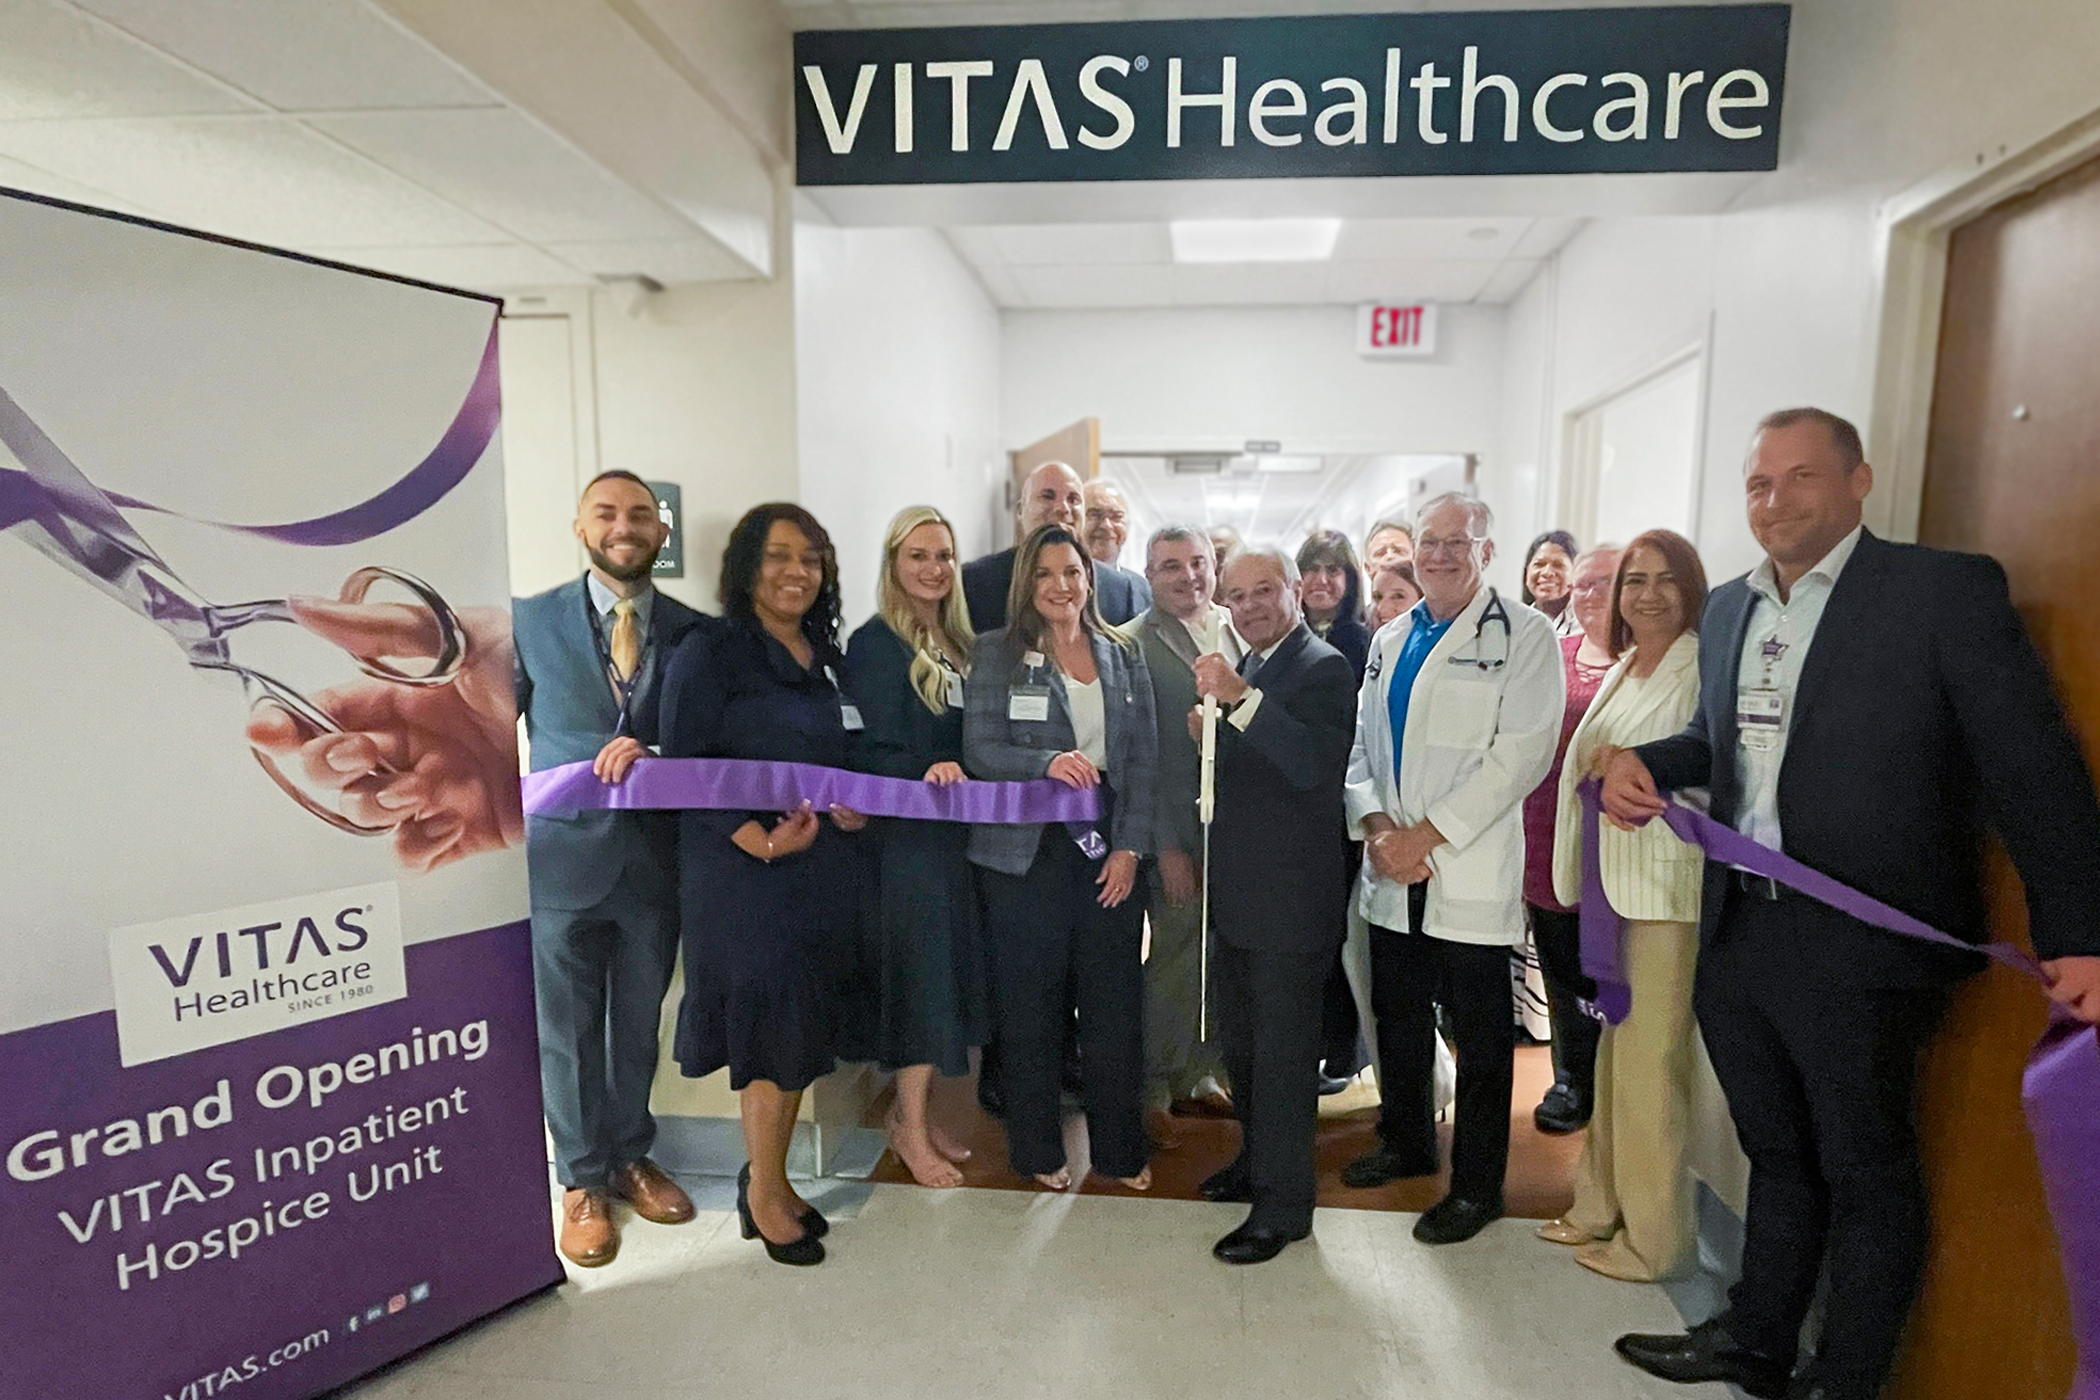 Broward Health Medical Center leaders and clinicians joined VITAS Healthcare for a ceremonial ribbon-cutting to commemorate the official opening of the expanded inpatient hospice unit.